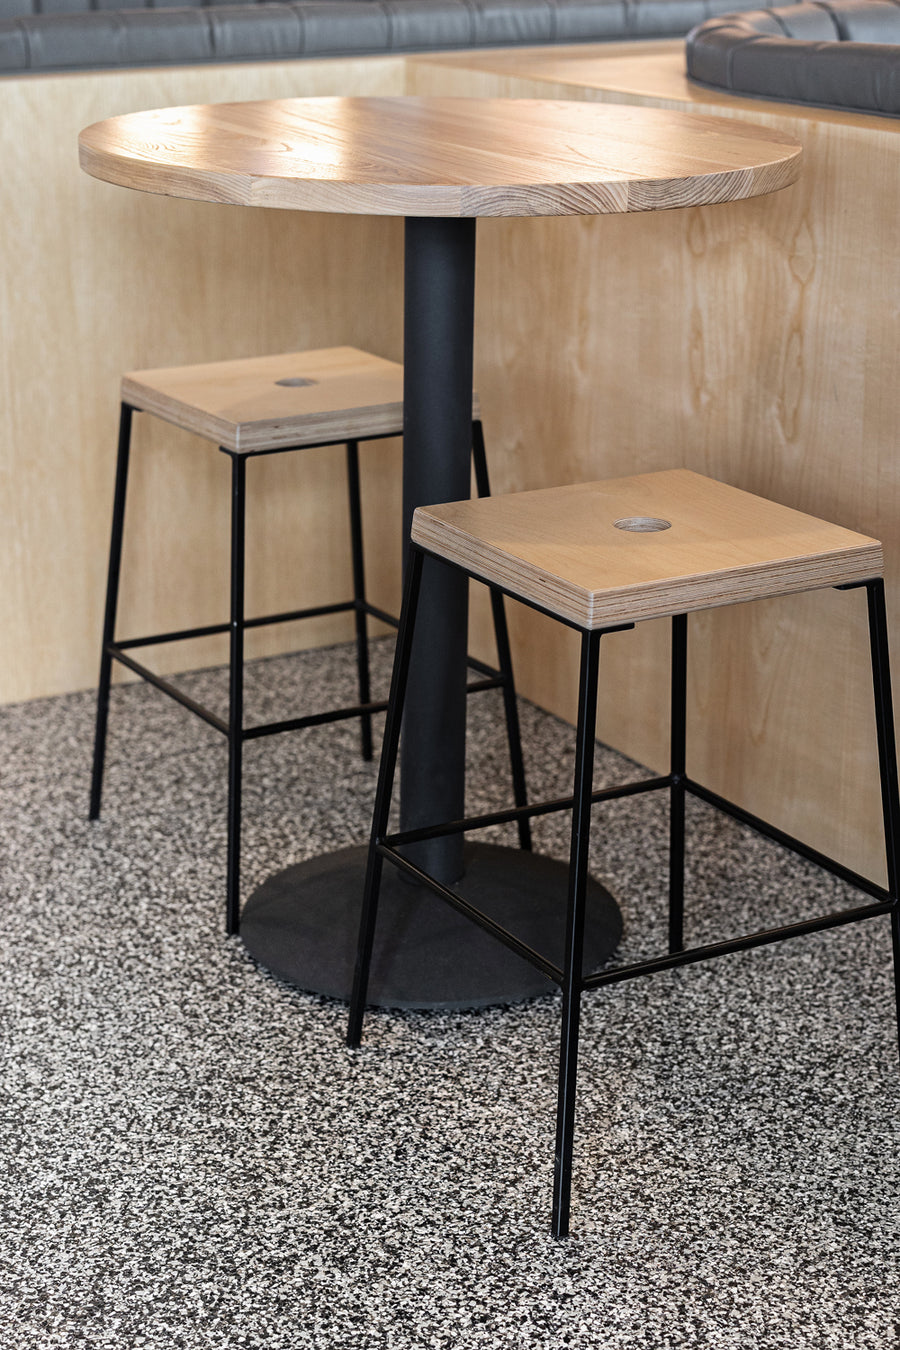 STAX counter stool